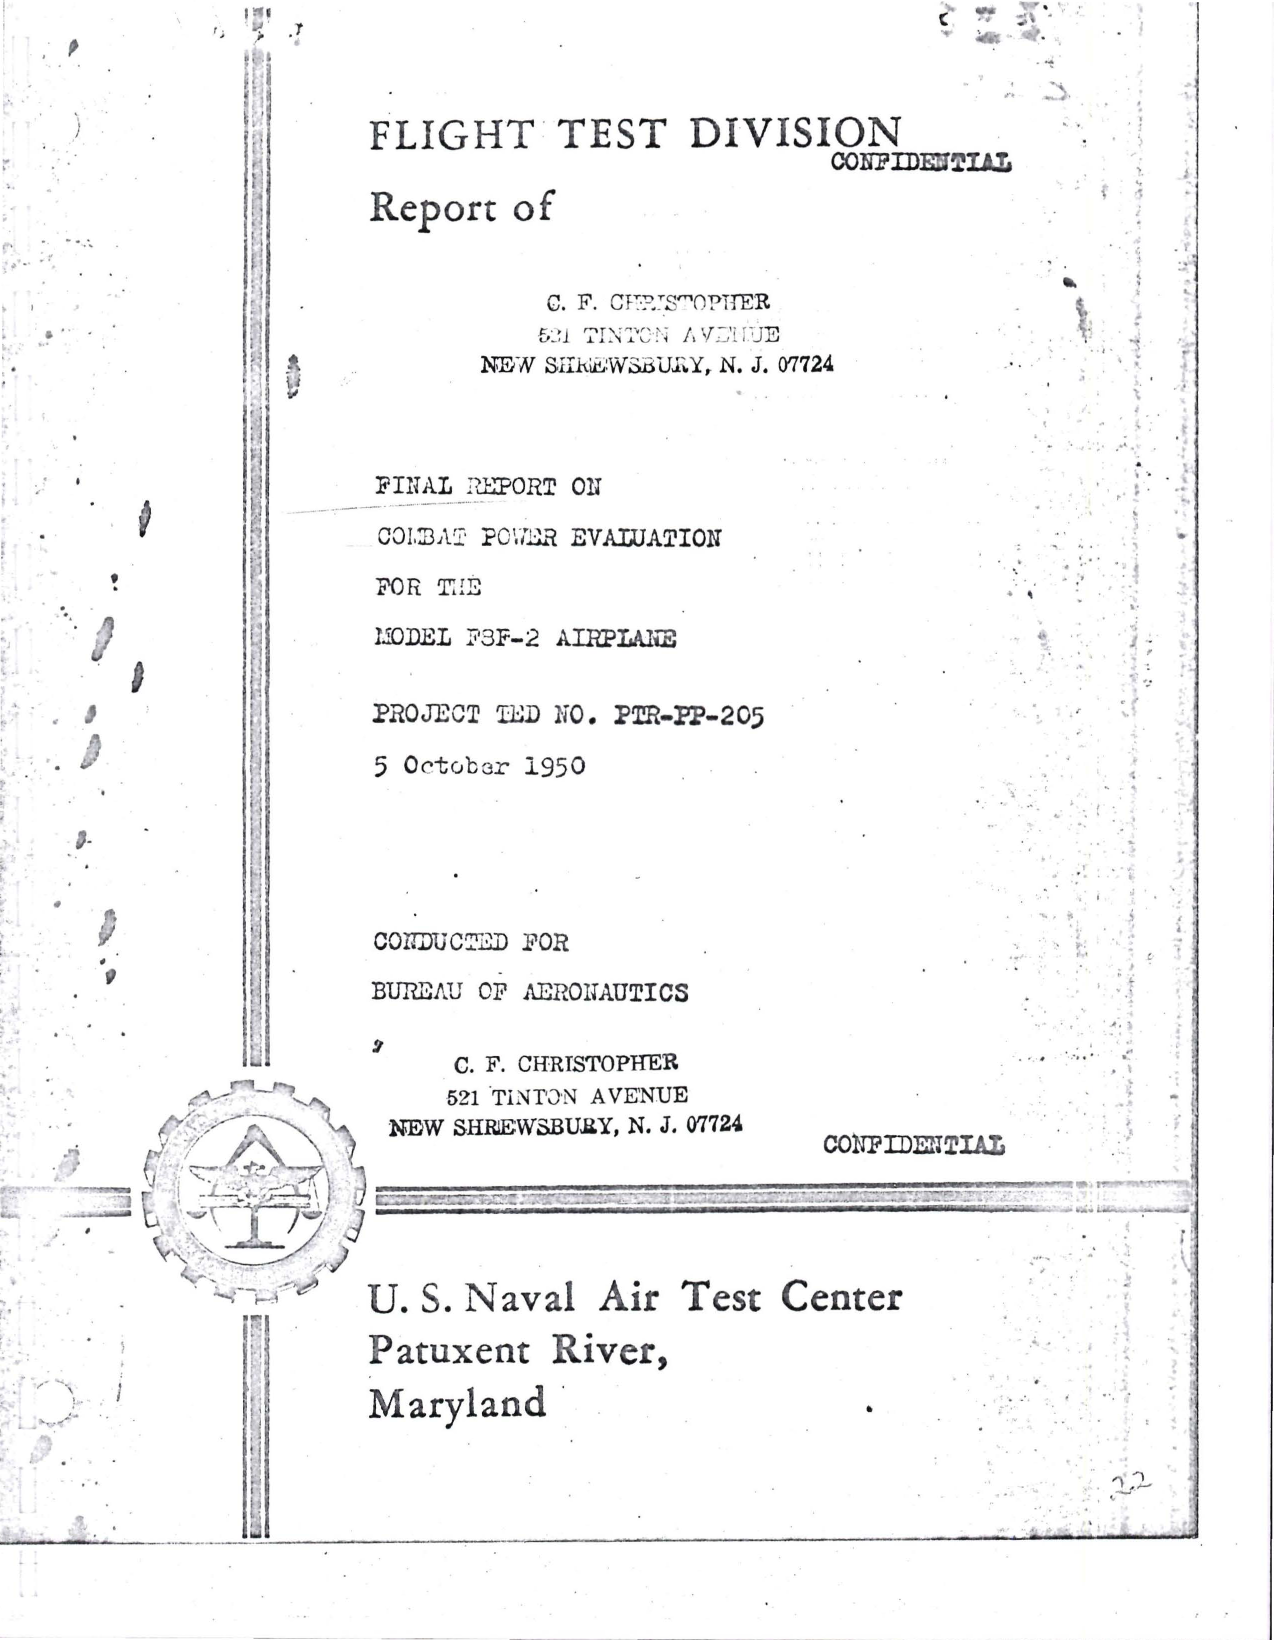 Sample page 1 from AirCorps Library document: Final Report on Combat Power Evaluation on F8F-2